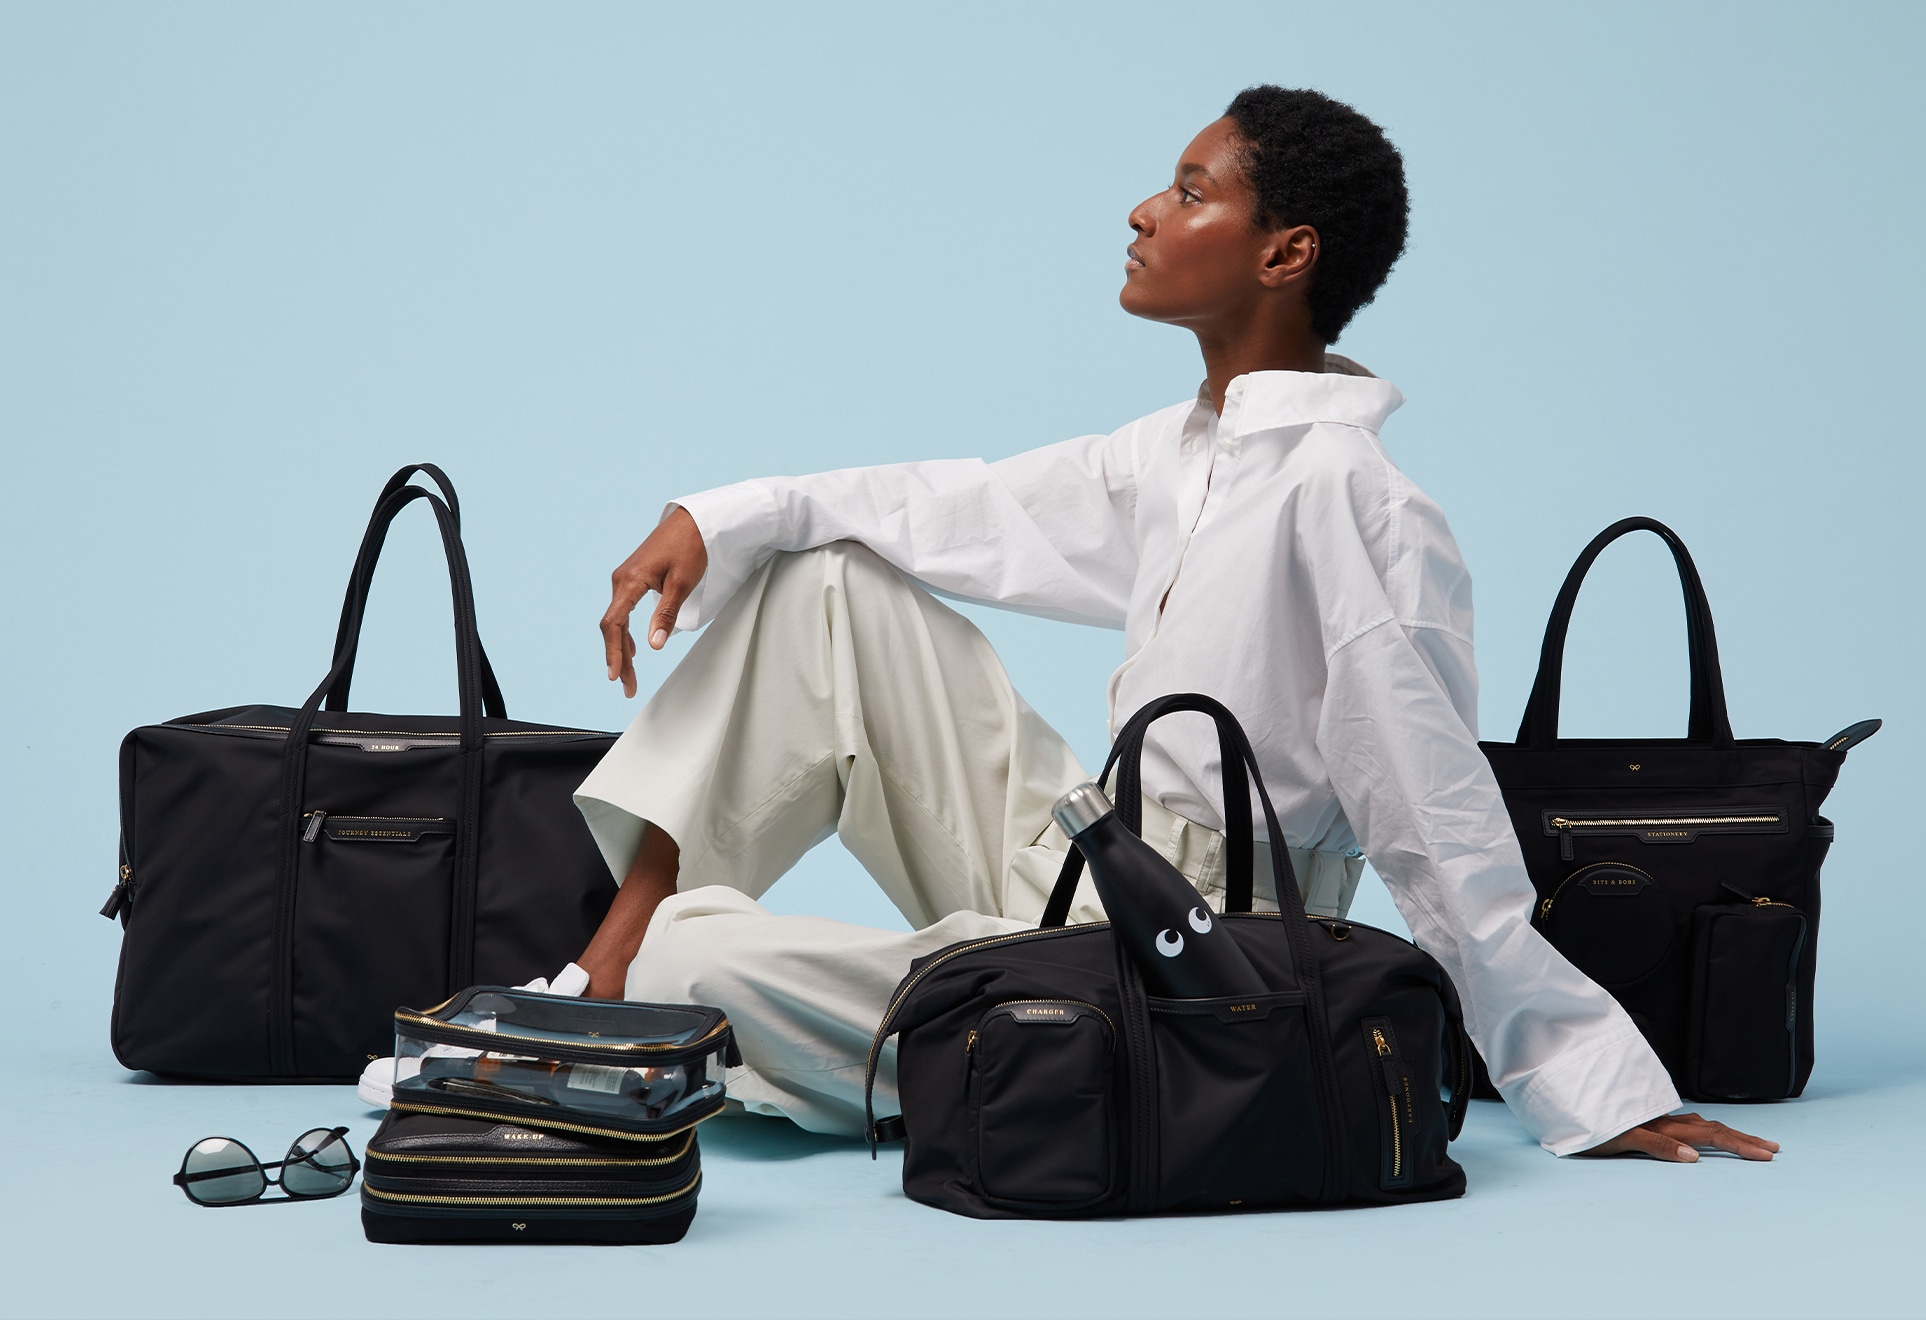 LVRSustainable Spotlights Anya Hindmarch for Plastic-Free July